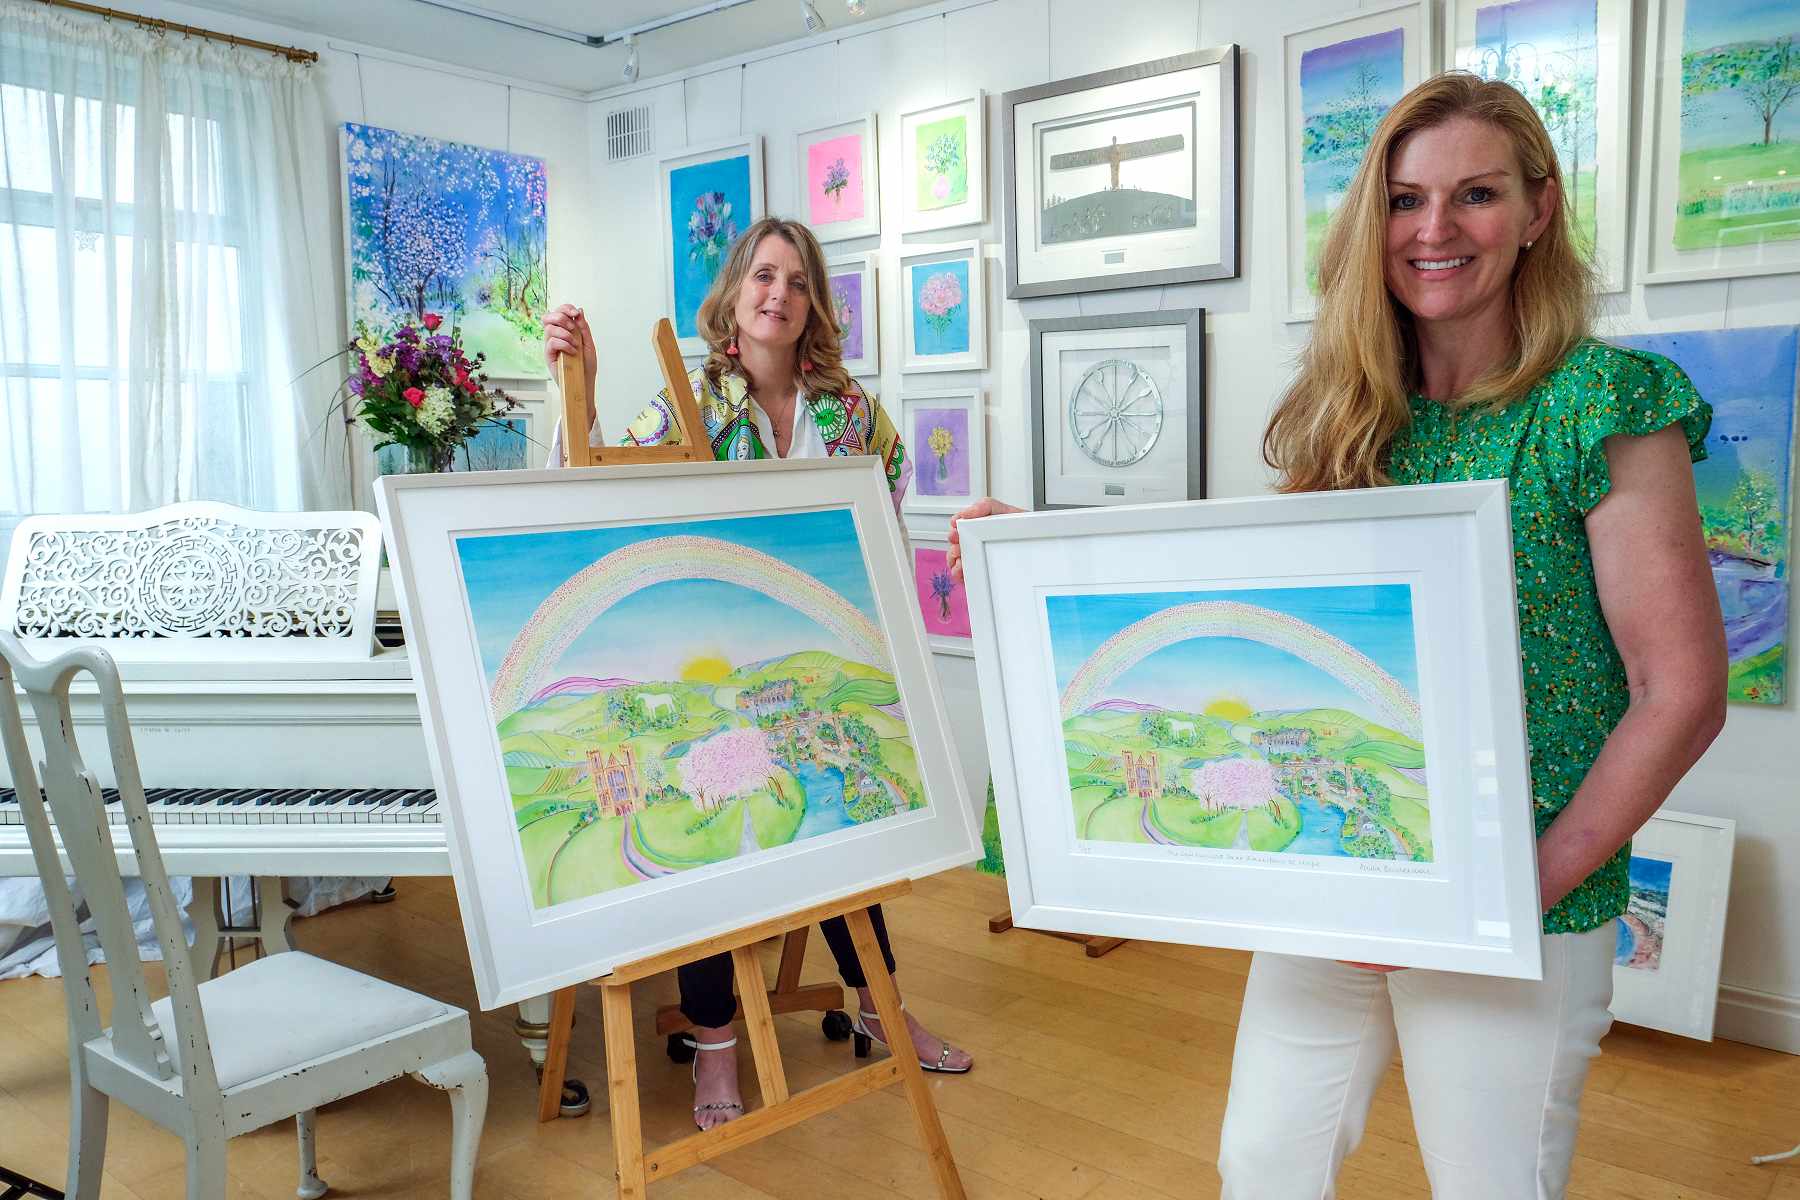 Artist Anita Bowerman, left, and Continued Care’s director Samantha Harrison at The Dove Tree Art Gallery and Studio in Harrogate with the ‘Rainbow of Hope’ painting